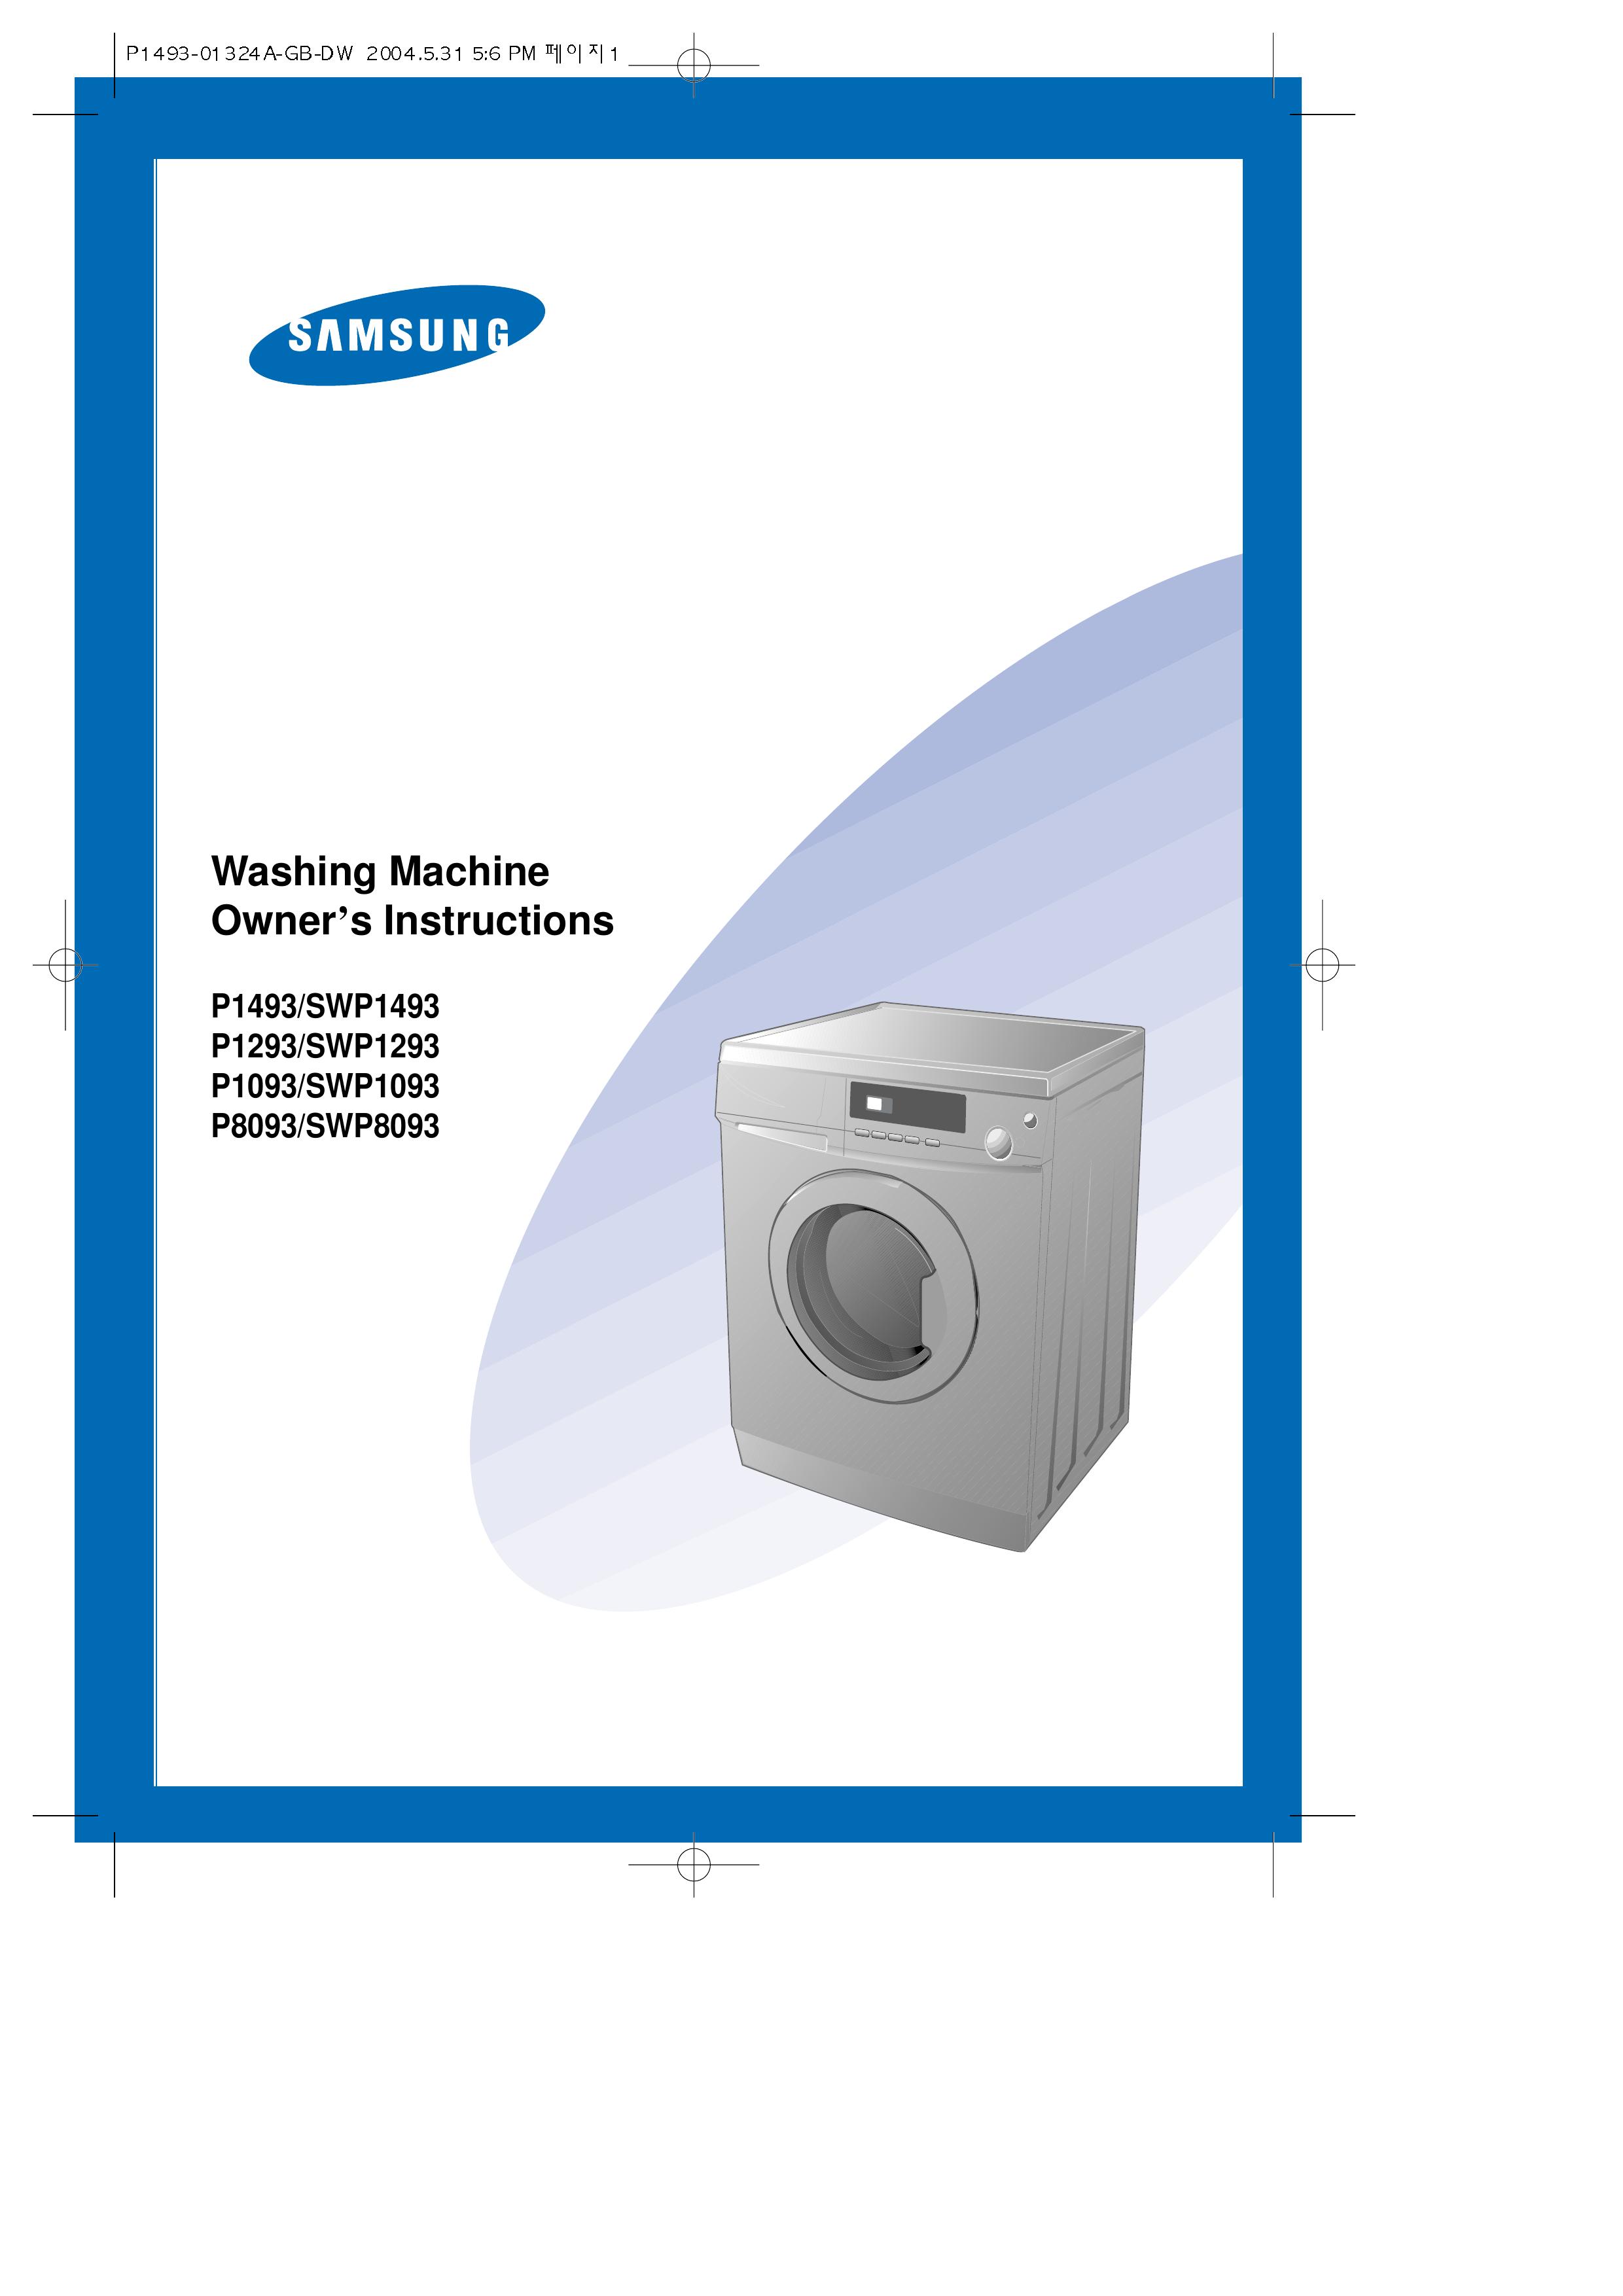 Samsung SWP1093 Washer/Dryer User Manual